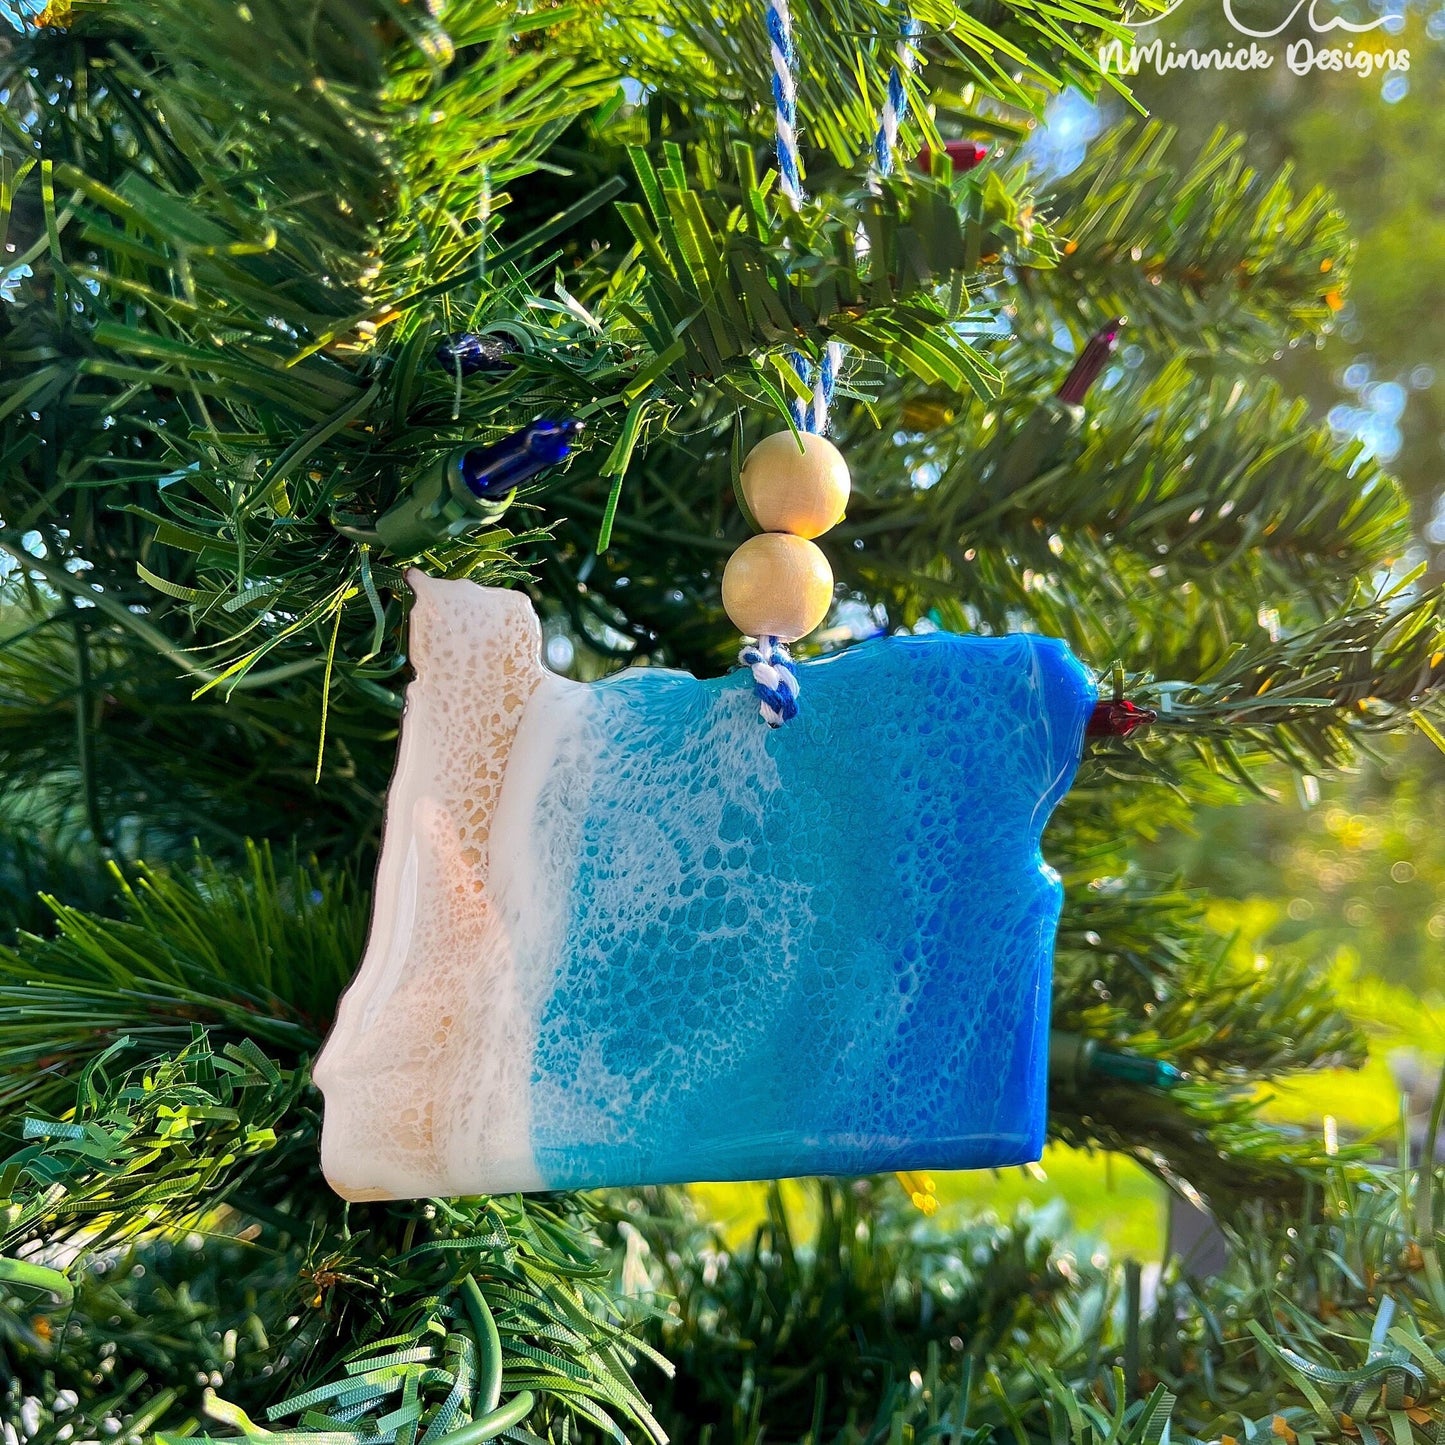 Oregon-shaped wooden Christmas ornament covered in blue and teal colored ocean resin art resembling the waves along Oregon&#39;s Pacific Coast. Finished with blue and white baker&#39;s twine and two wooden beads.